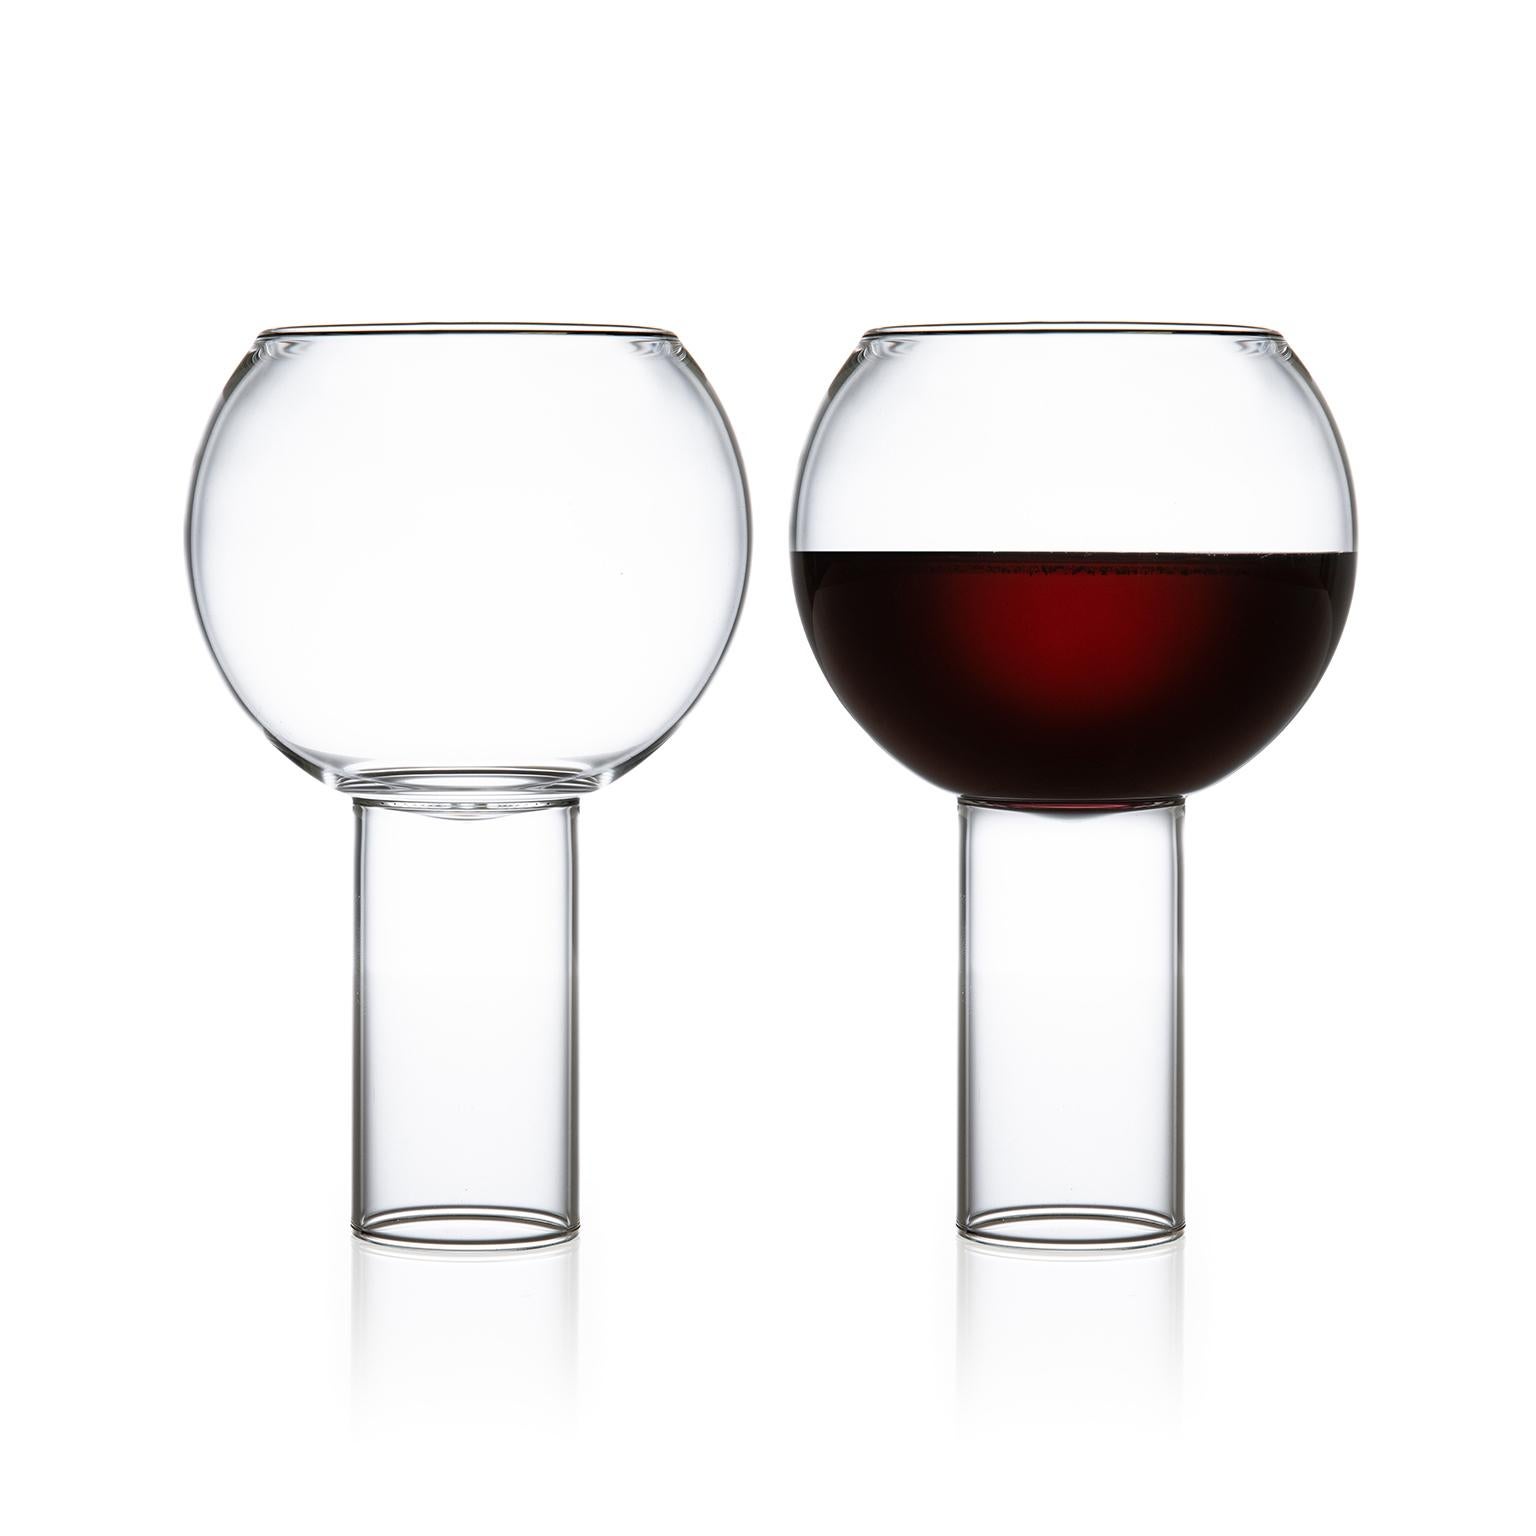 Tulip tall large - set of two

This item is also available in the US.

The Tulip collection was inspired by the small bistro wine glasses found in European bars and cafes. The bowl of the glass sits down into the cylindrical stem, highlighting